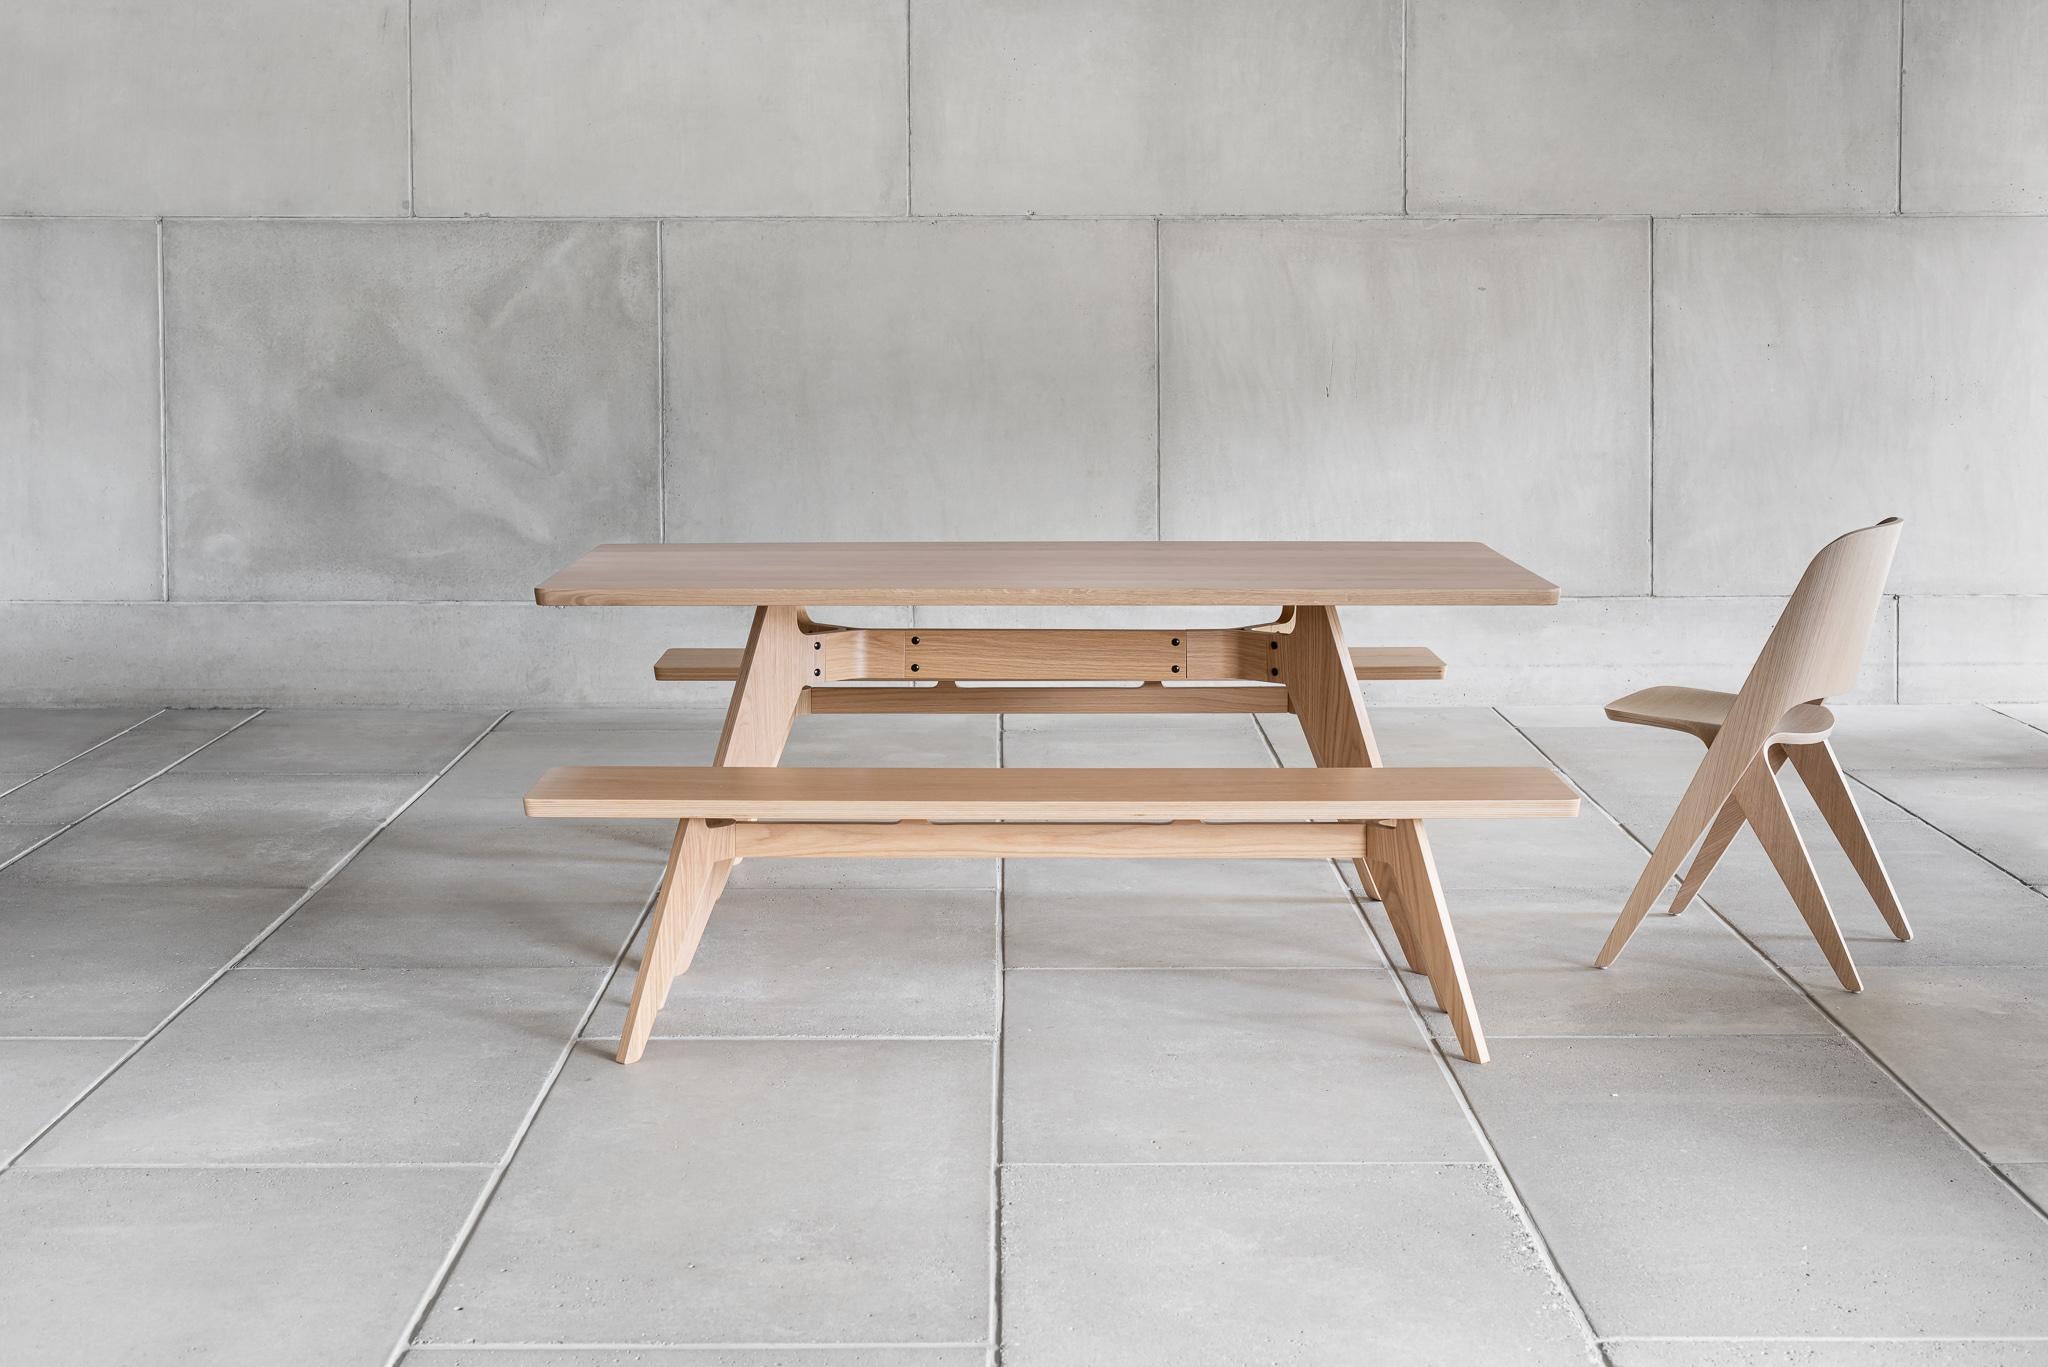 LAVITTA Bench 170 cm by Timo Mikkonen & Antti x Poiat 
Lavitta Collection 2016

Available dimensions: 
- H.42 x 170 x 32 cm 
- H.42 x 220 x 32 cm 

Wood finishes : Oak or Dark oak

Model shown: 
- H.42 x 170 x 32 cm
- Oak

The Lavitta Bench is a